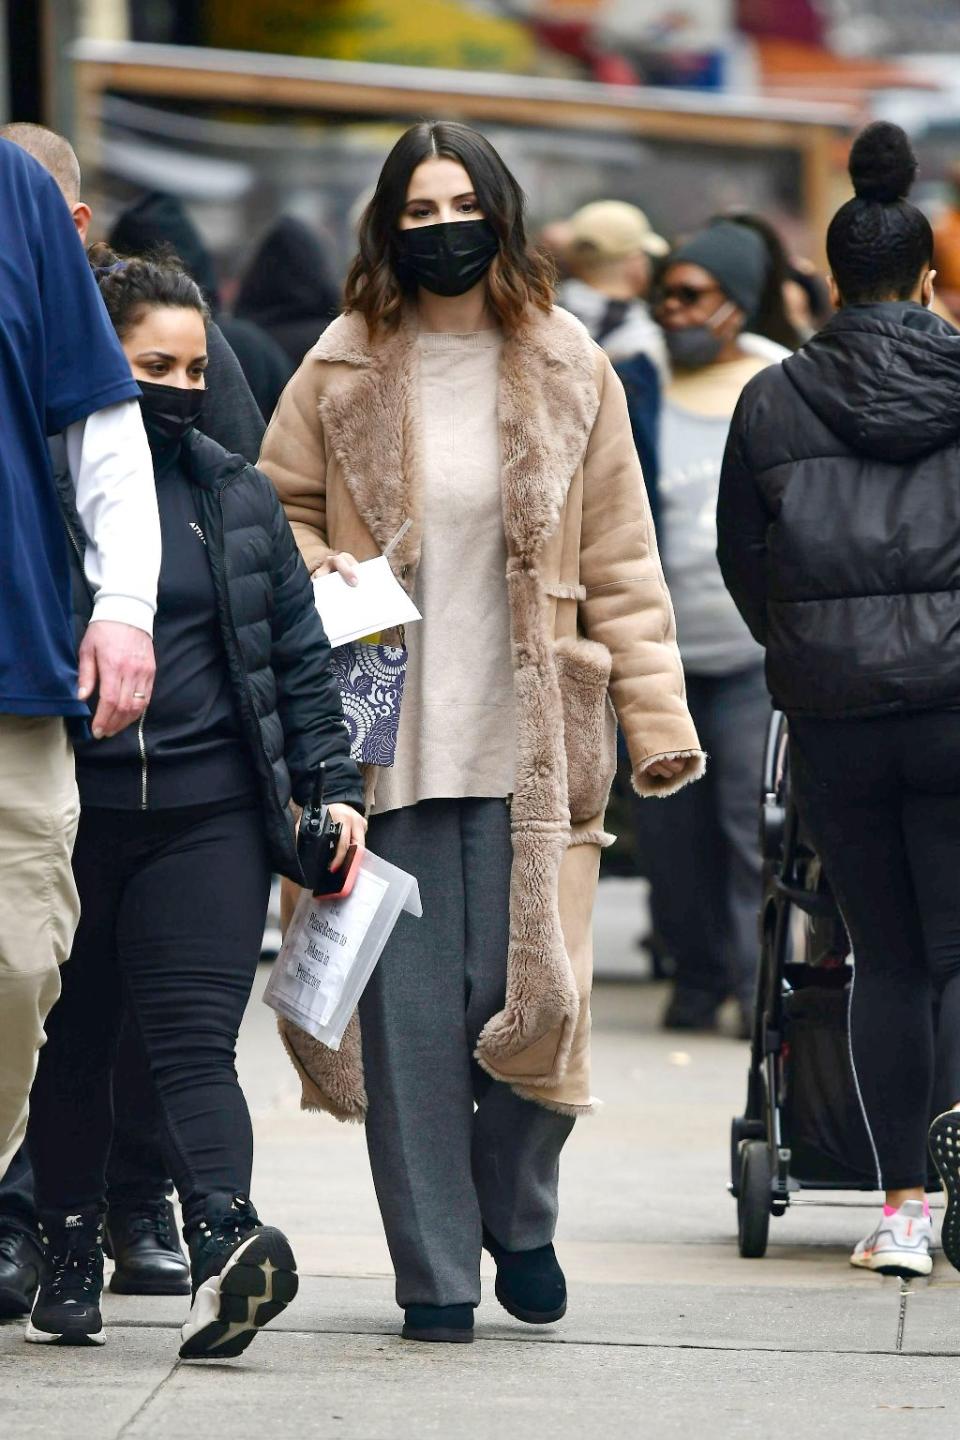 Selena Gomez spotted on the set of her HULU series, “Only Murders in the Building” on February 23, 2022. - Credit: SplashNews.com